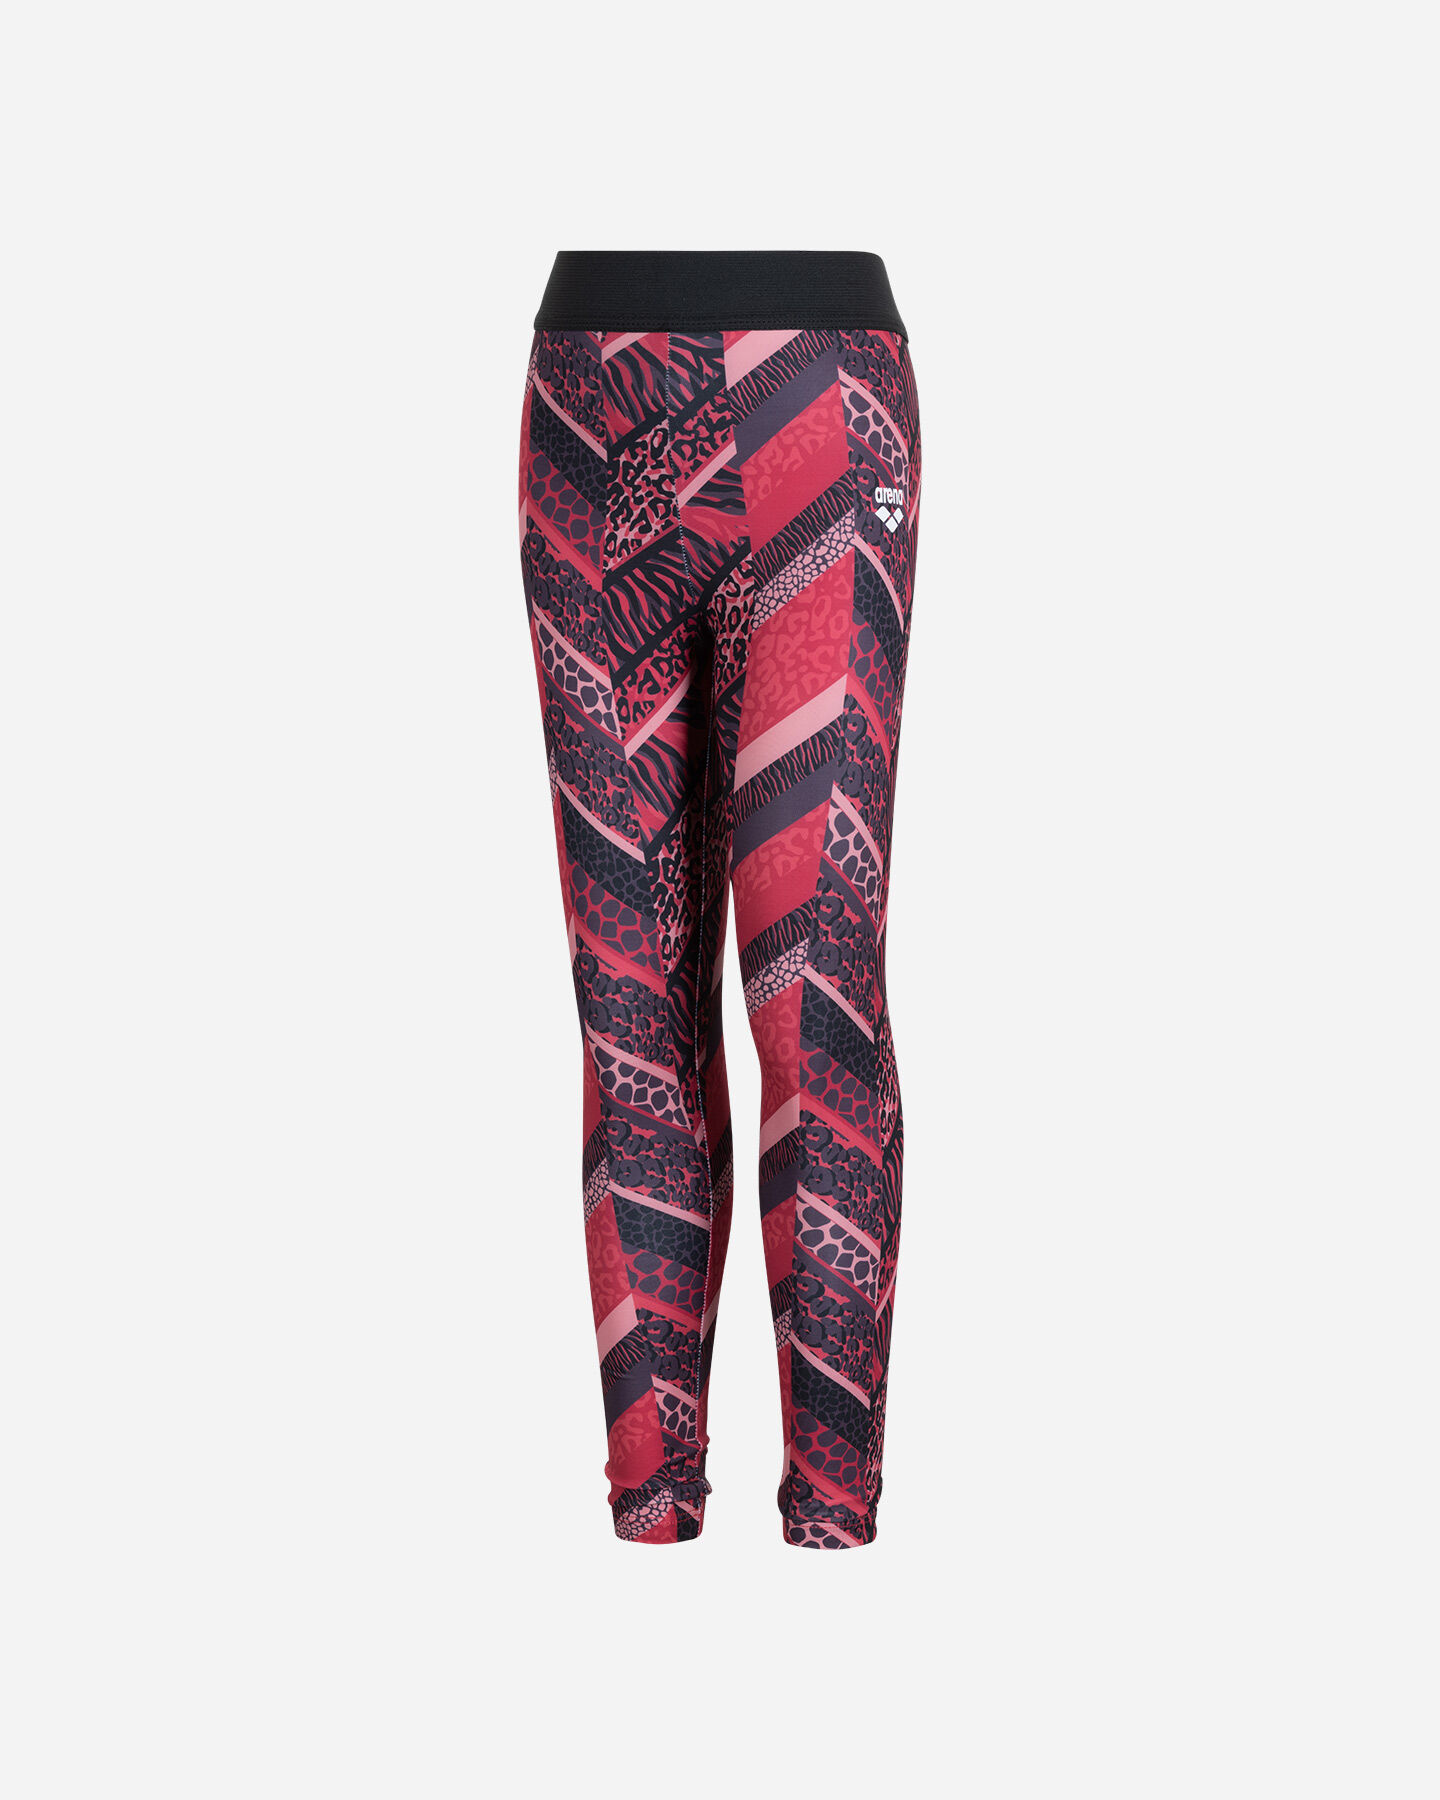  Leggings ARENA ATHLETIC JR S4106176|896|4A scatto 0